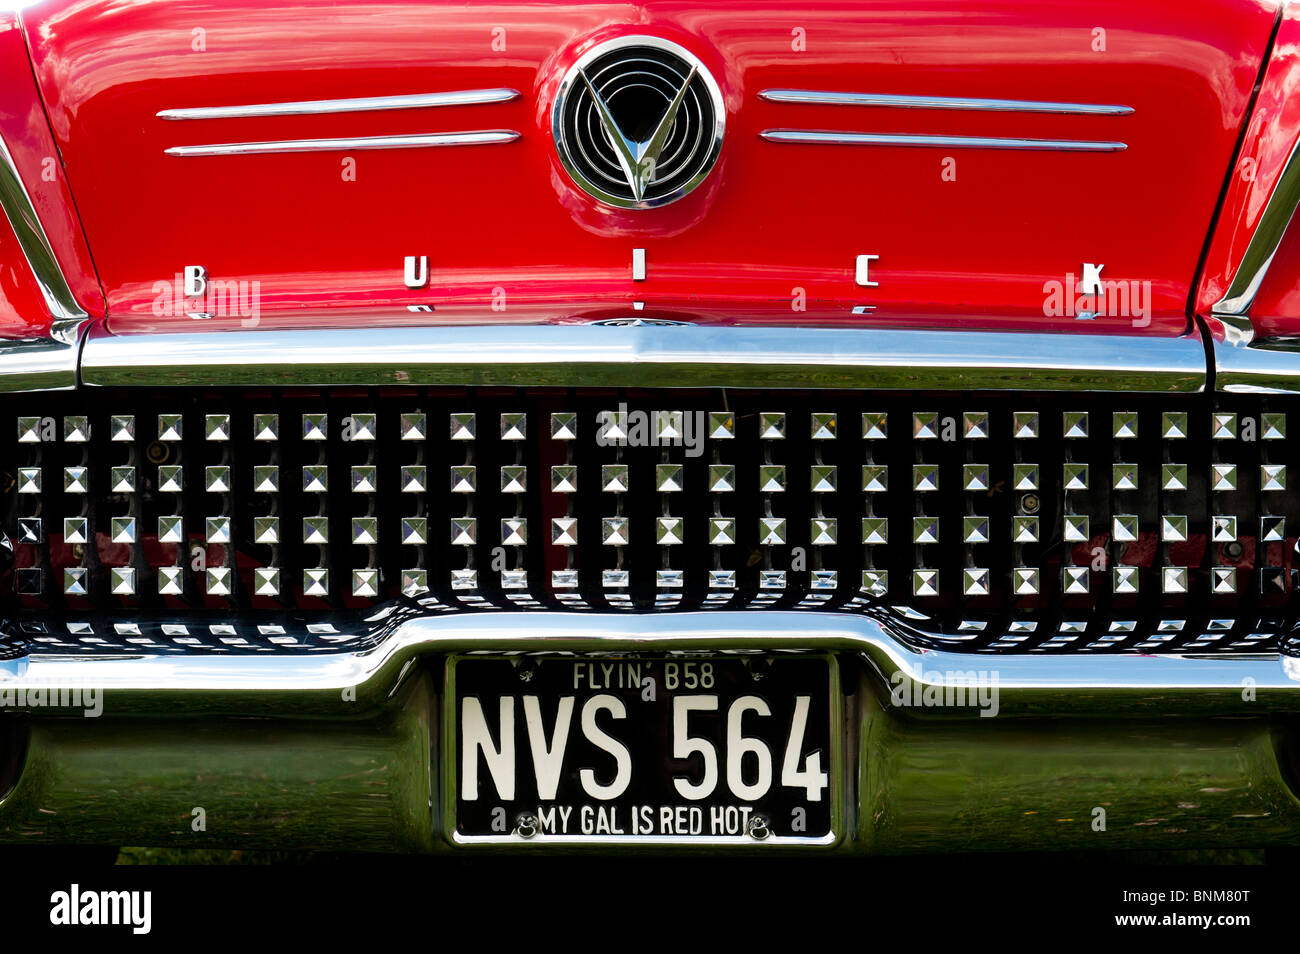 Red 1958 Buick special. Buick 2 door special convertible. Classic american fifties car Stock Photo